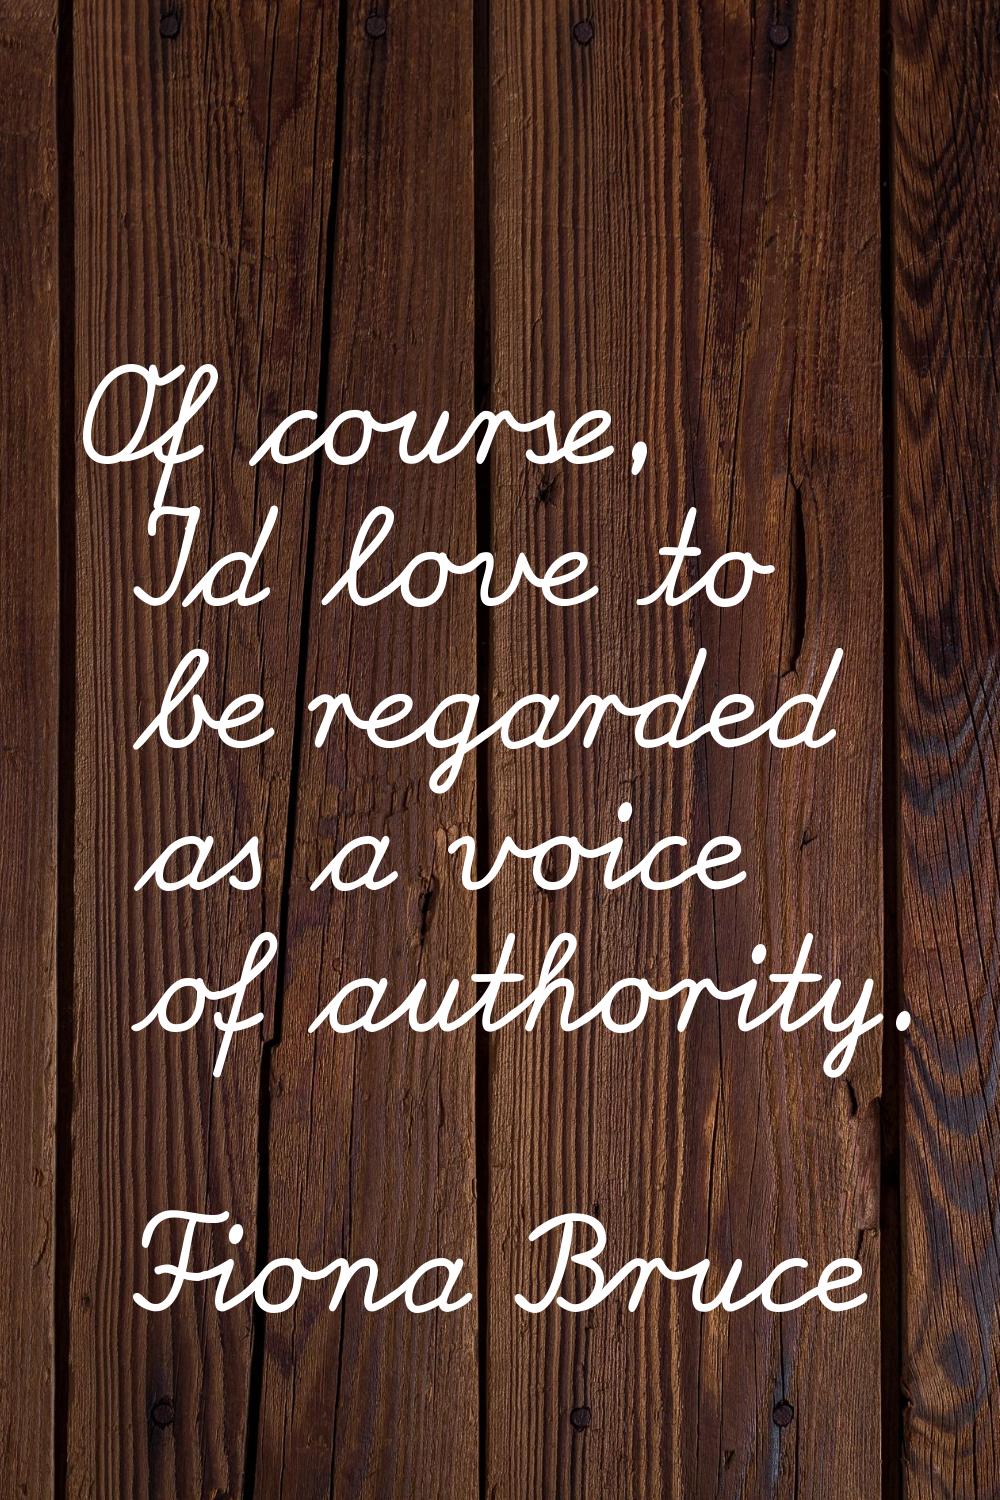 Of course, I'd love to be regarded as a voice of authority.